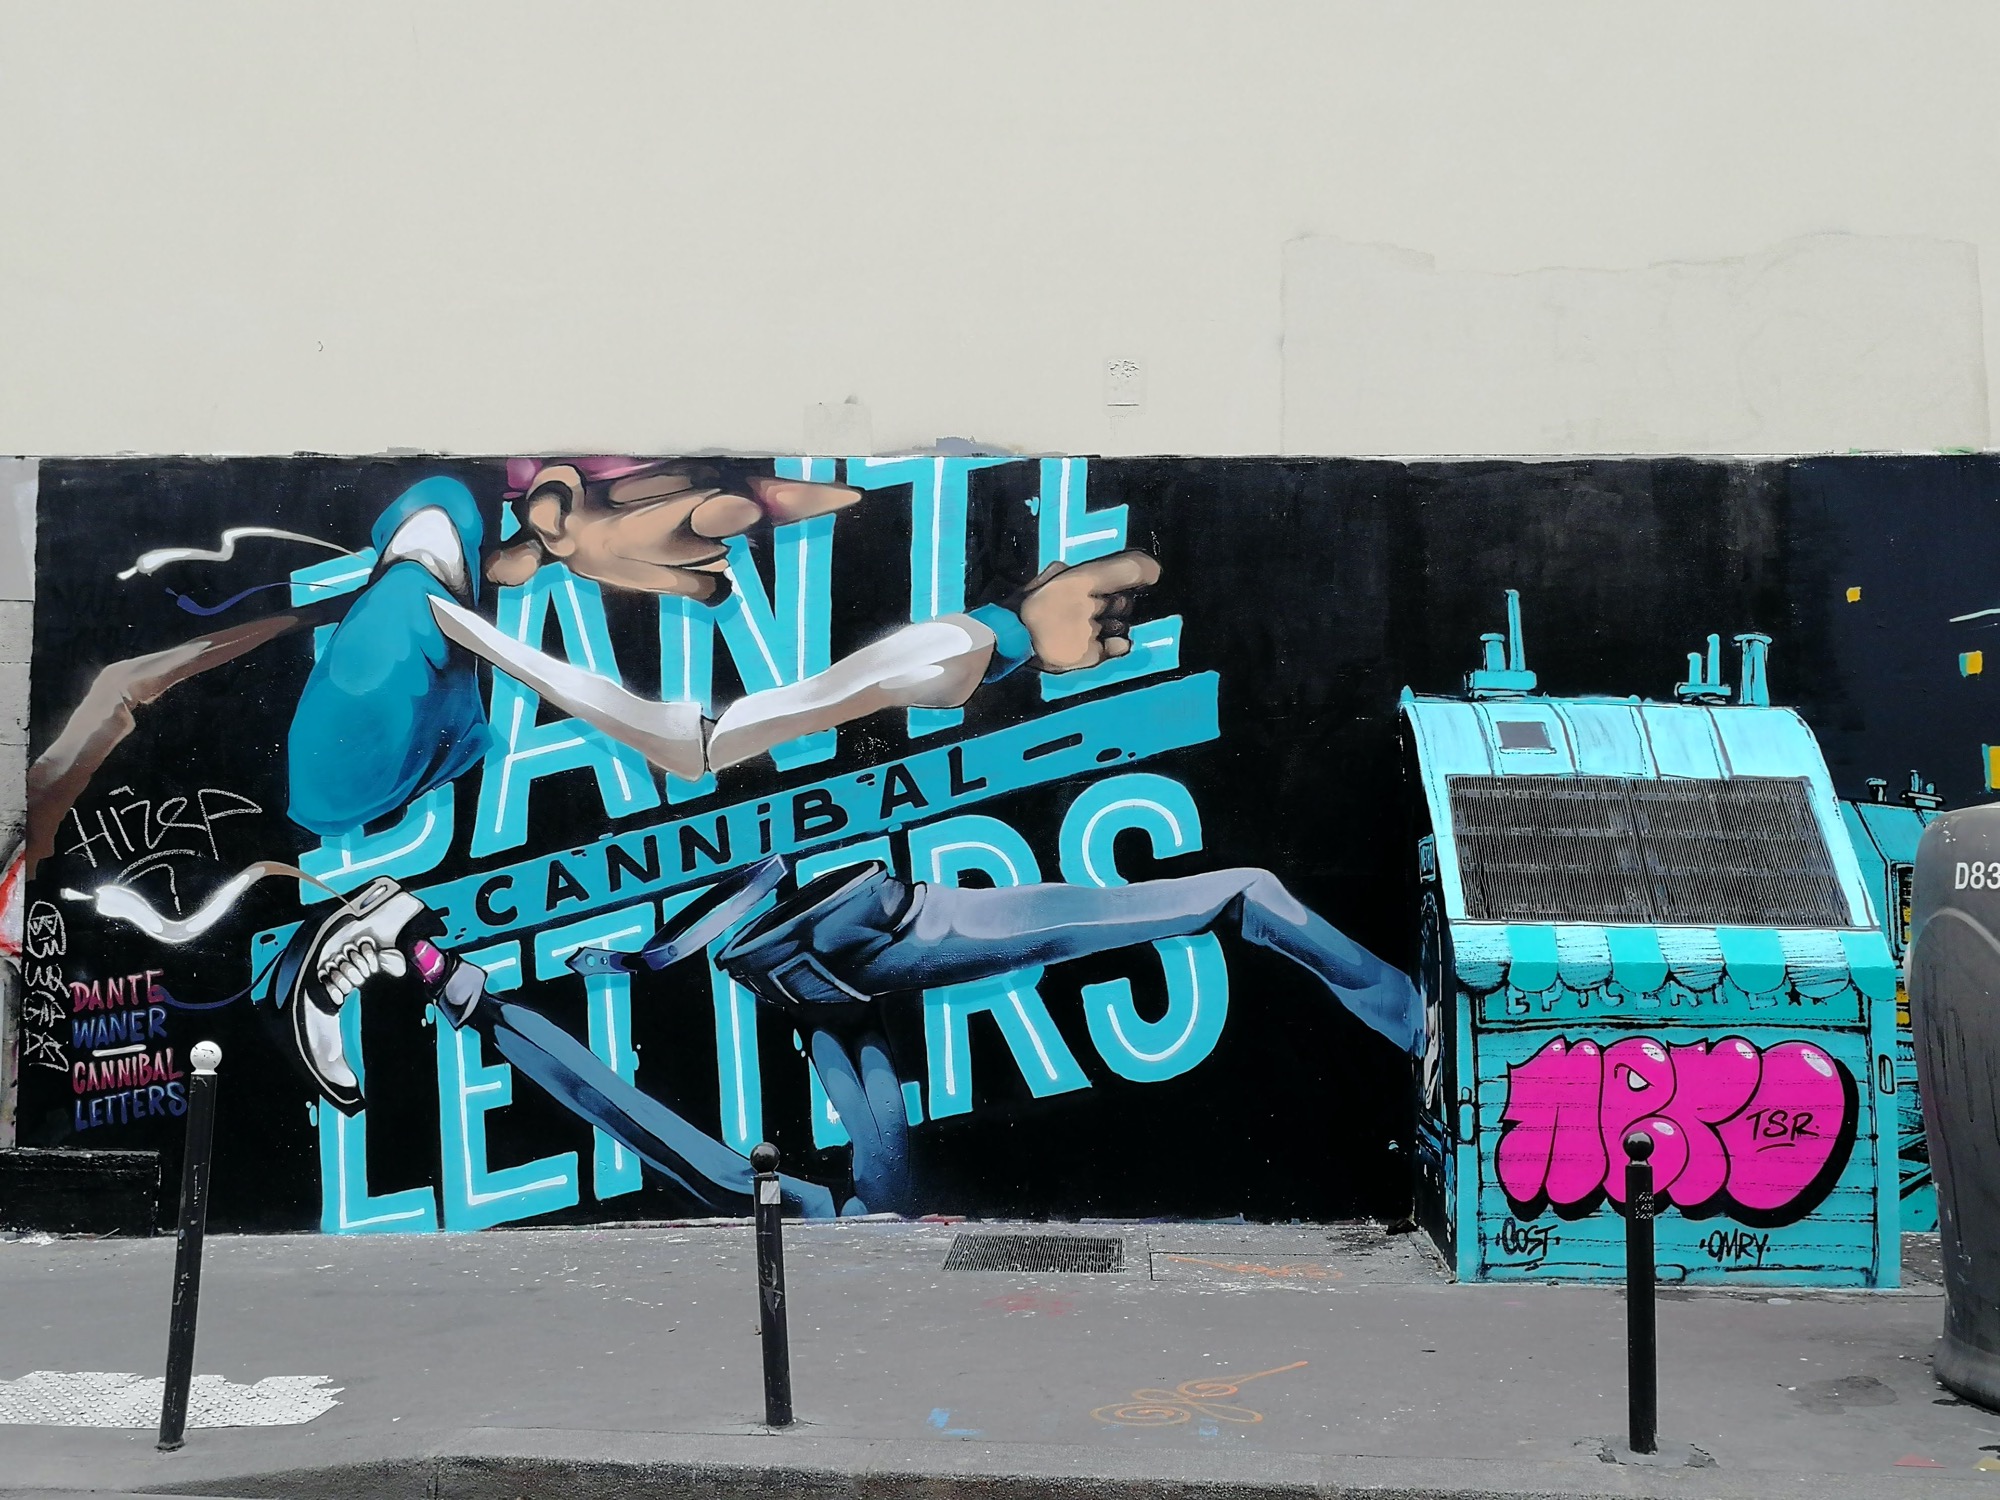 Graffiti 1154  captured by Rabot in Paris France